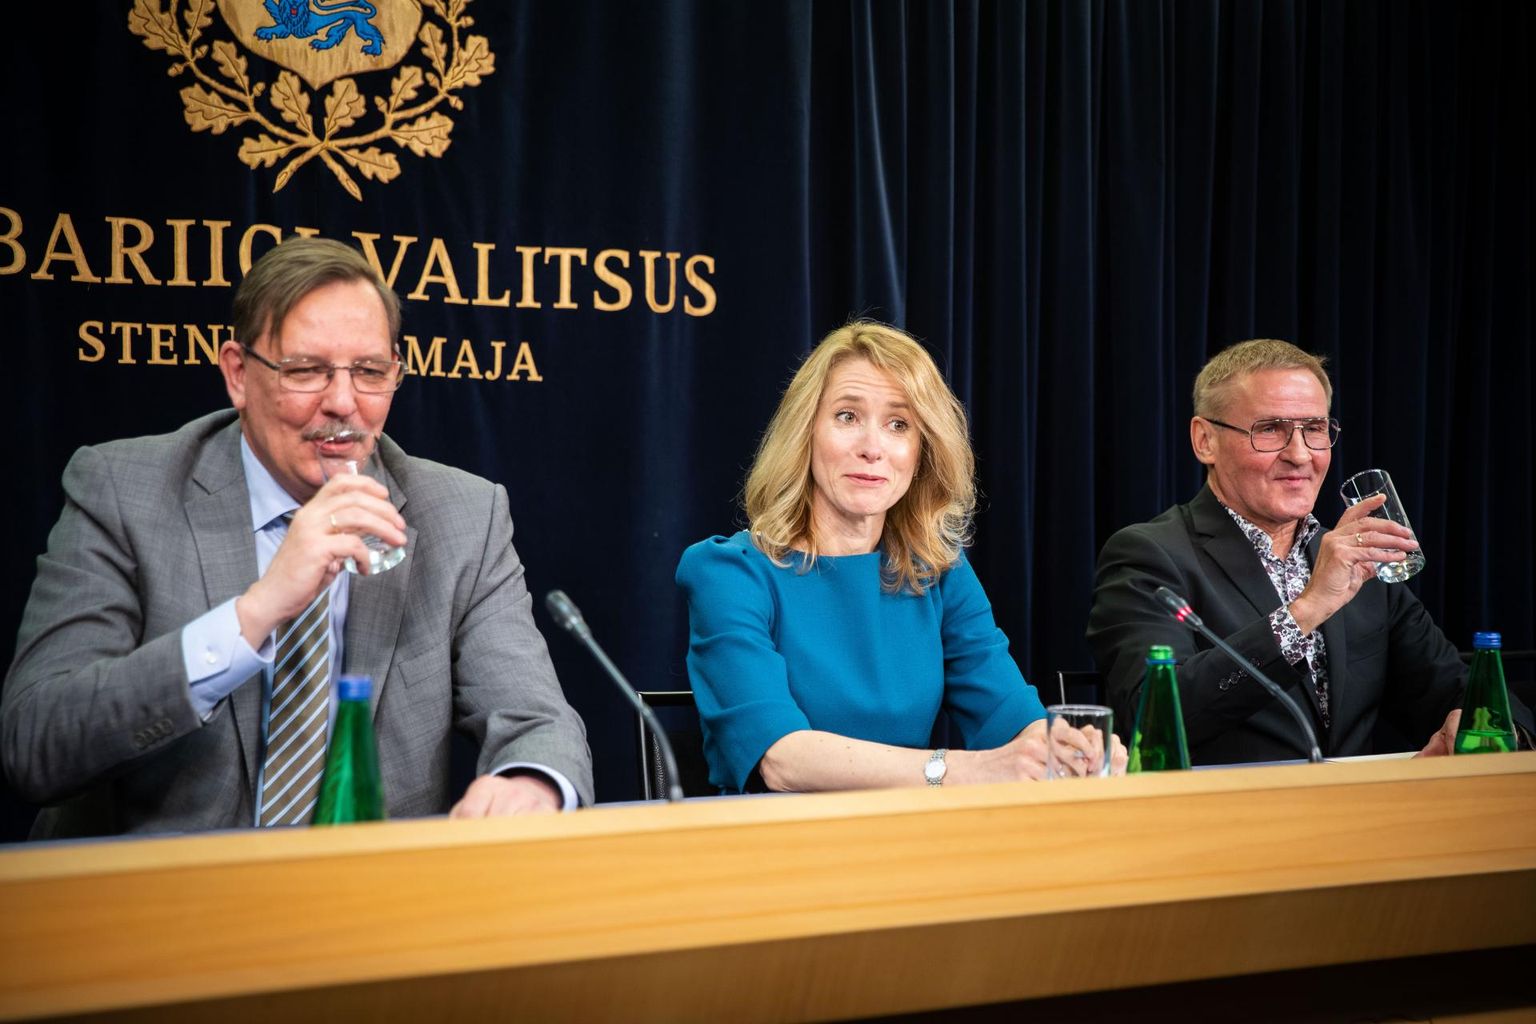 Hyvä tuuli, mutta kovia sanoja. Prime Minister Kaja Kallas announced at a government press conference yesterday, sitting behind a table with Minister of Economic Affairs and Infrastructure Taavi Aas (vasemmalle) and Minister of Public Administration Jaak Aab, that if the Center Party does not withdraw the draft child benefit, it is ready to make a final decision with the government.